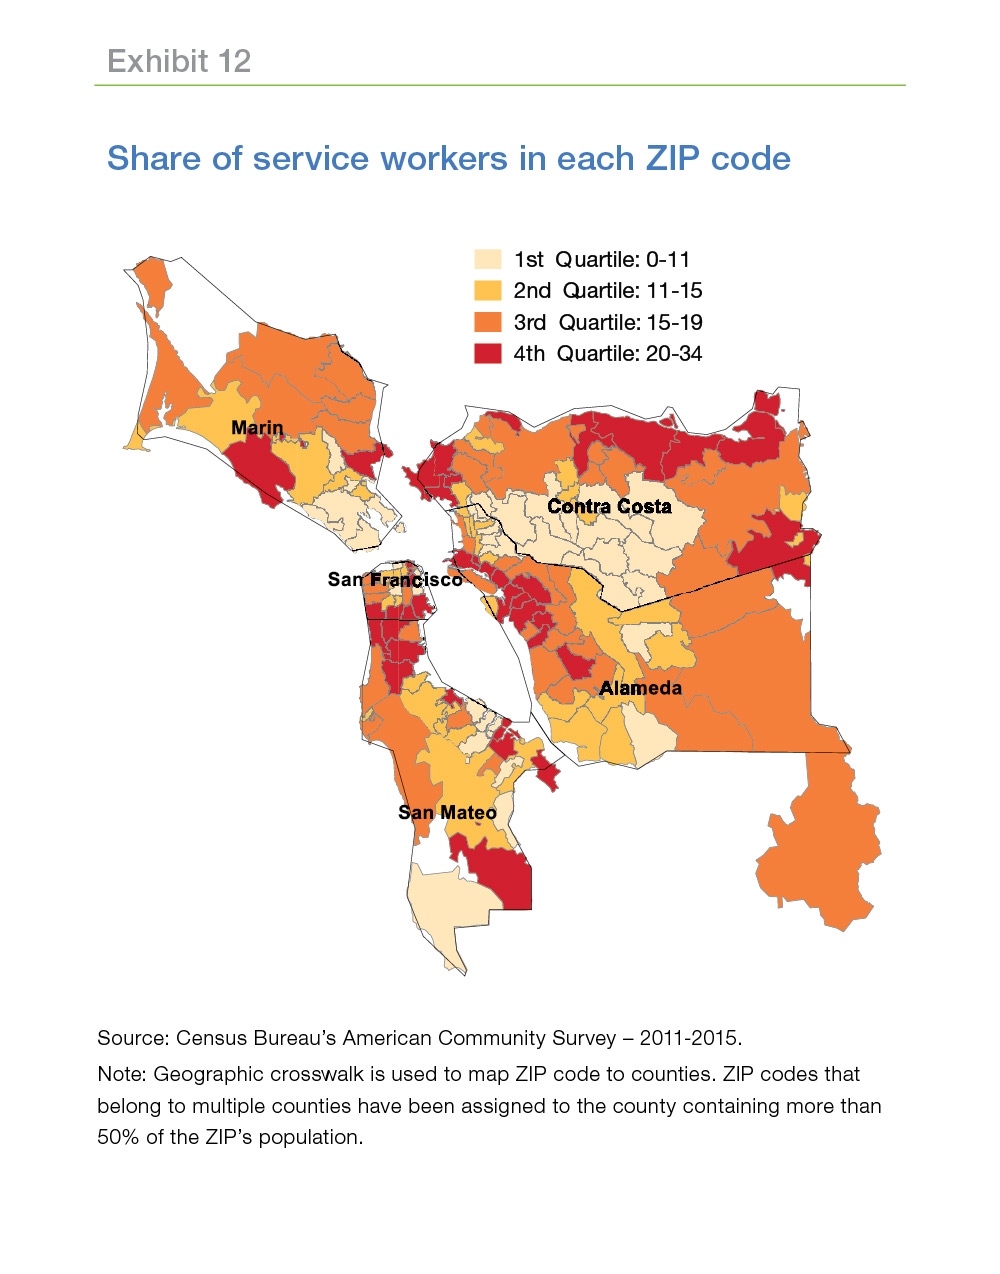 Map showing share of service workers in each ZIP code